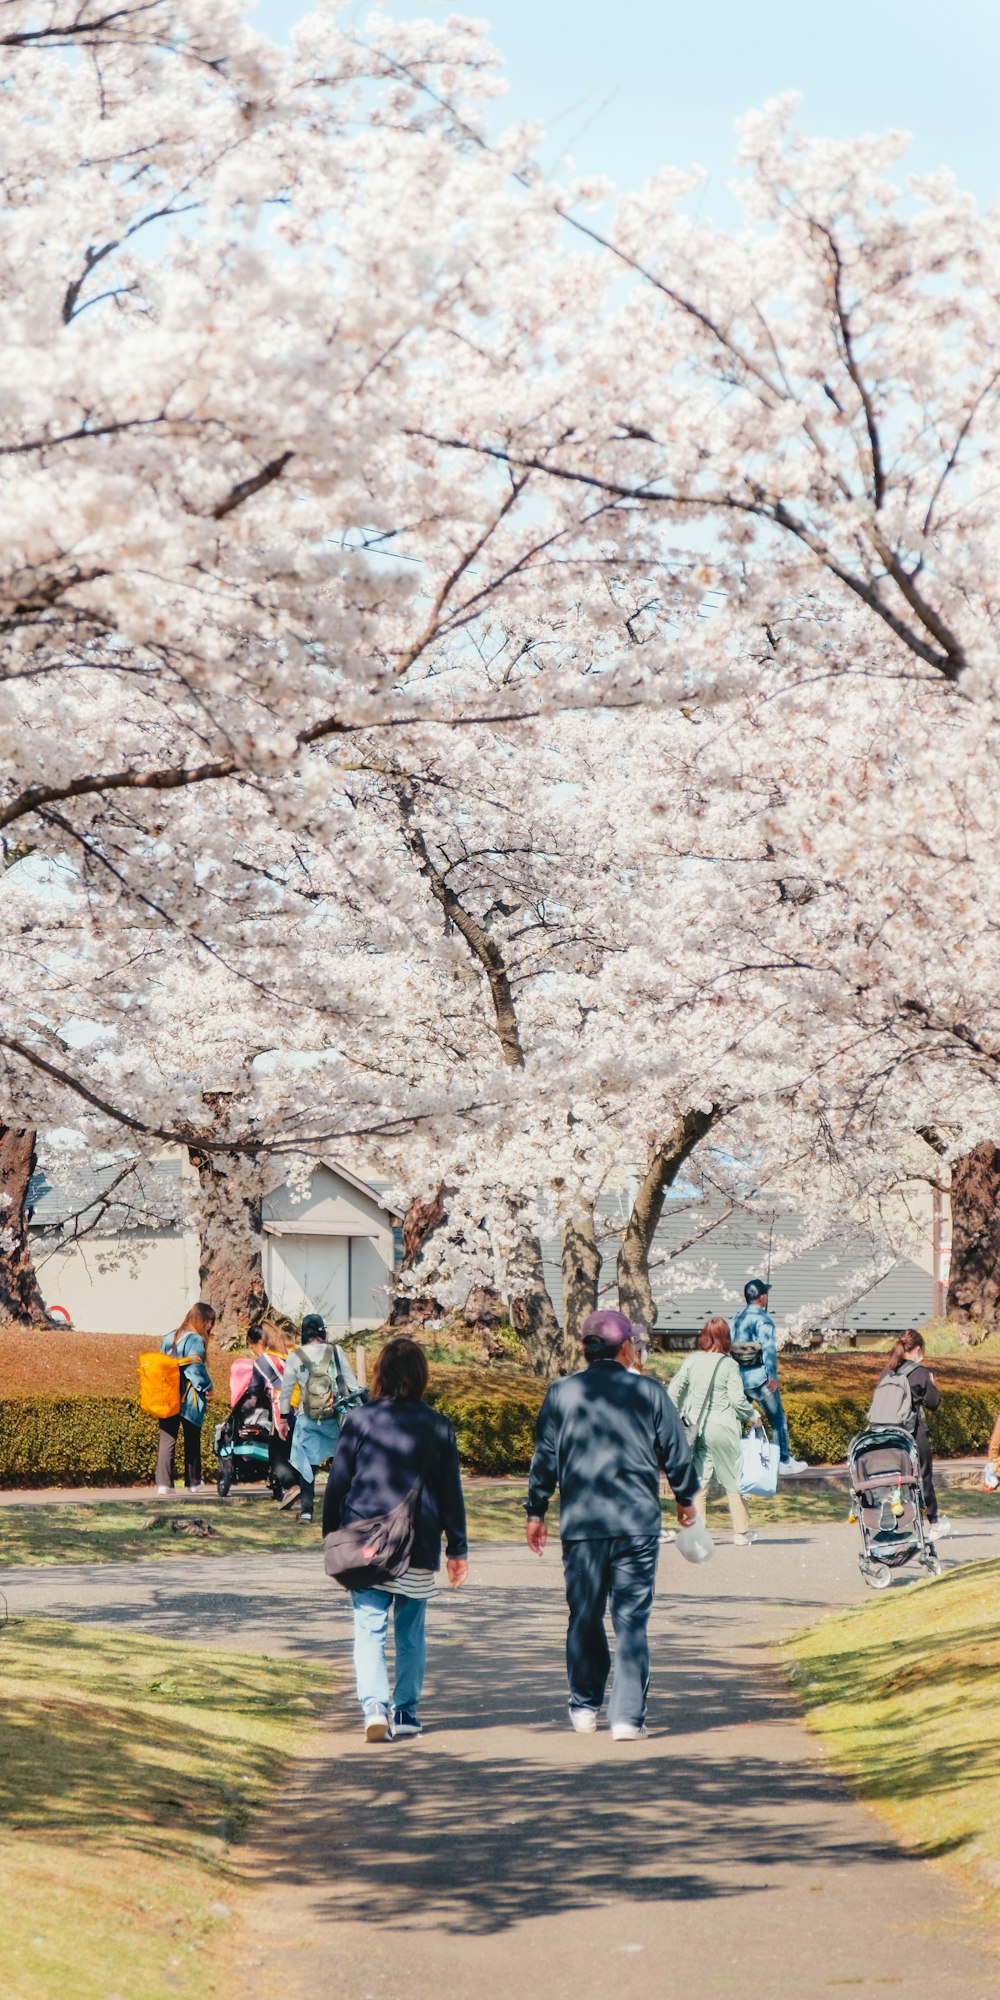 a group of people walking down a path under cherry blossom trees